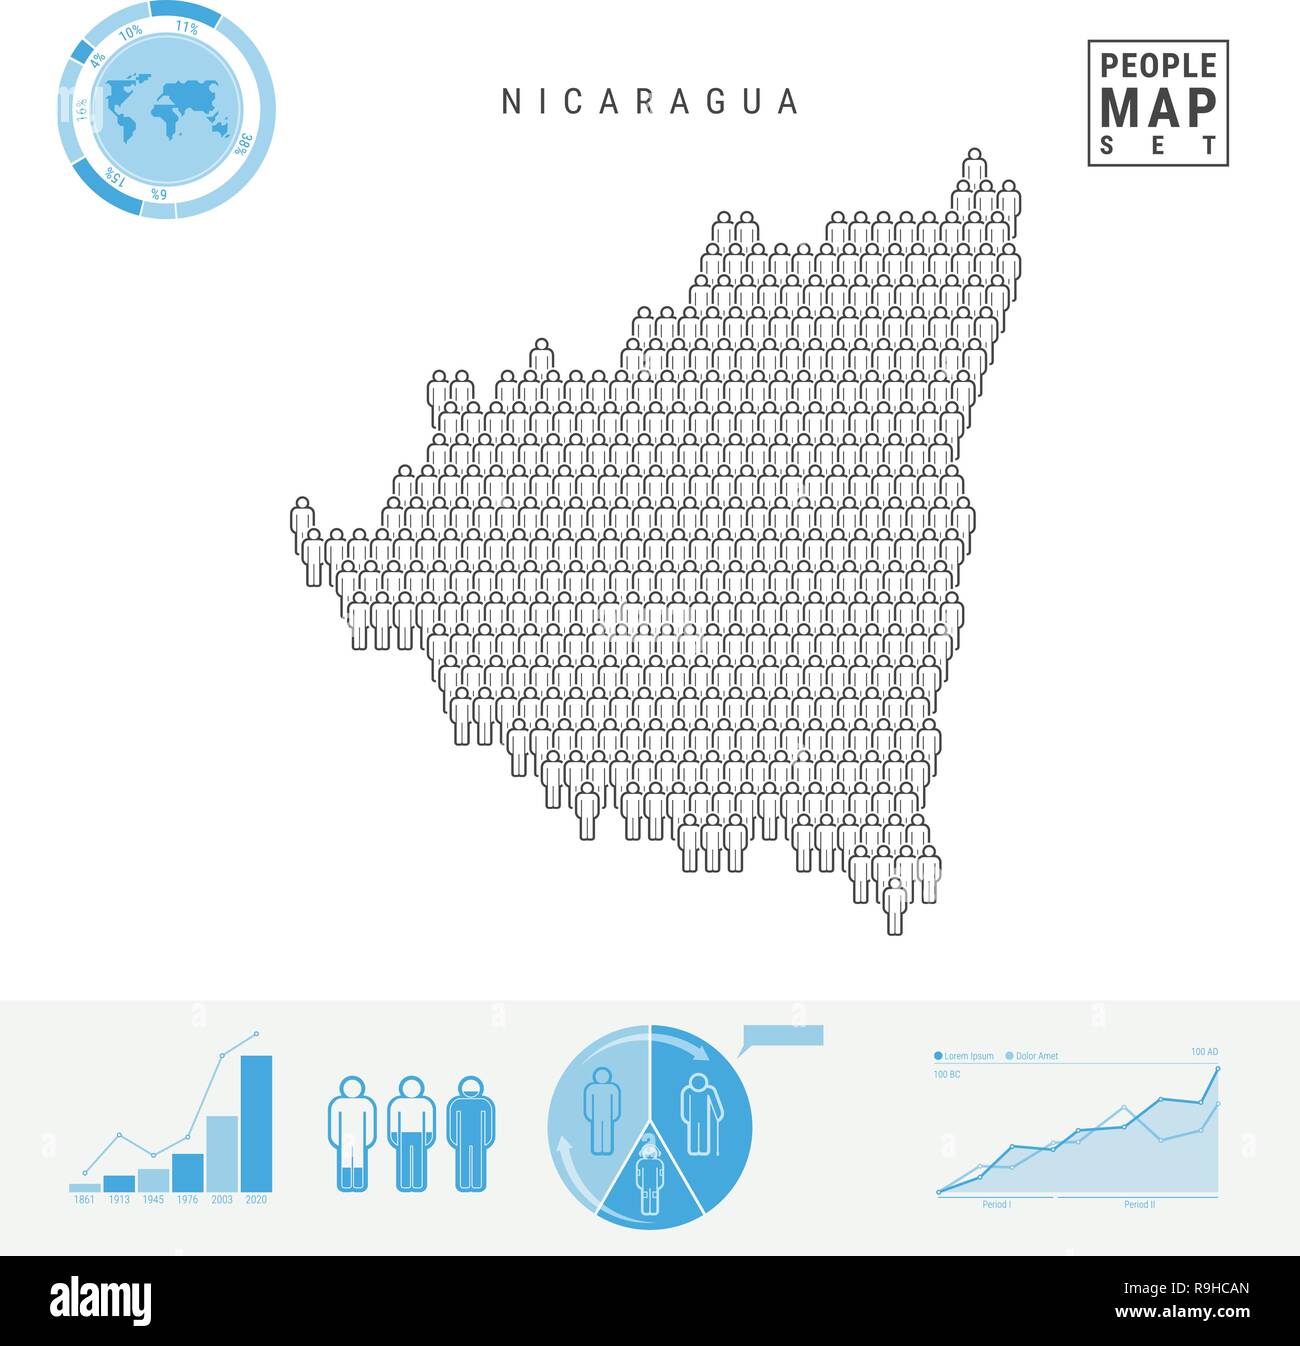 Nicaragua People Icon Map. People Crowd in the Shape of a Map of Nicaragua. Stylized Silhouette of Nicaragua. Population Growth and Aging Infographic  Stock Vector